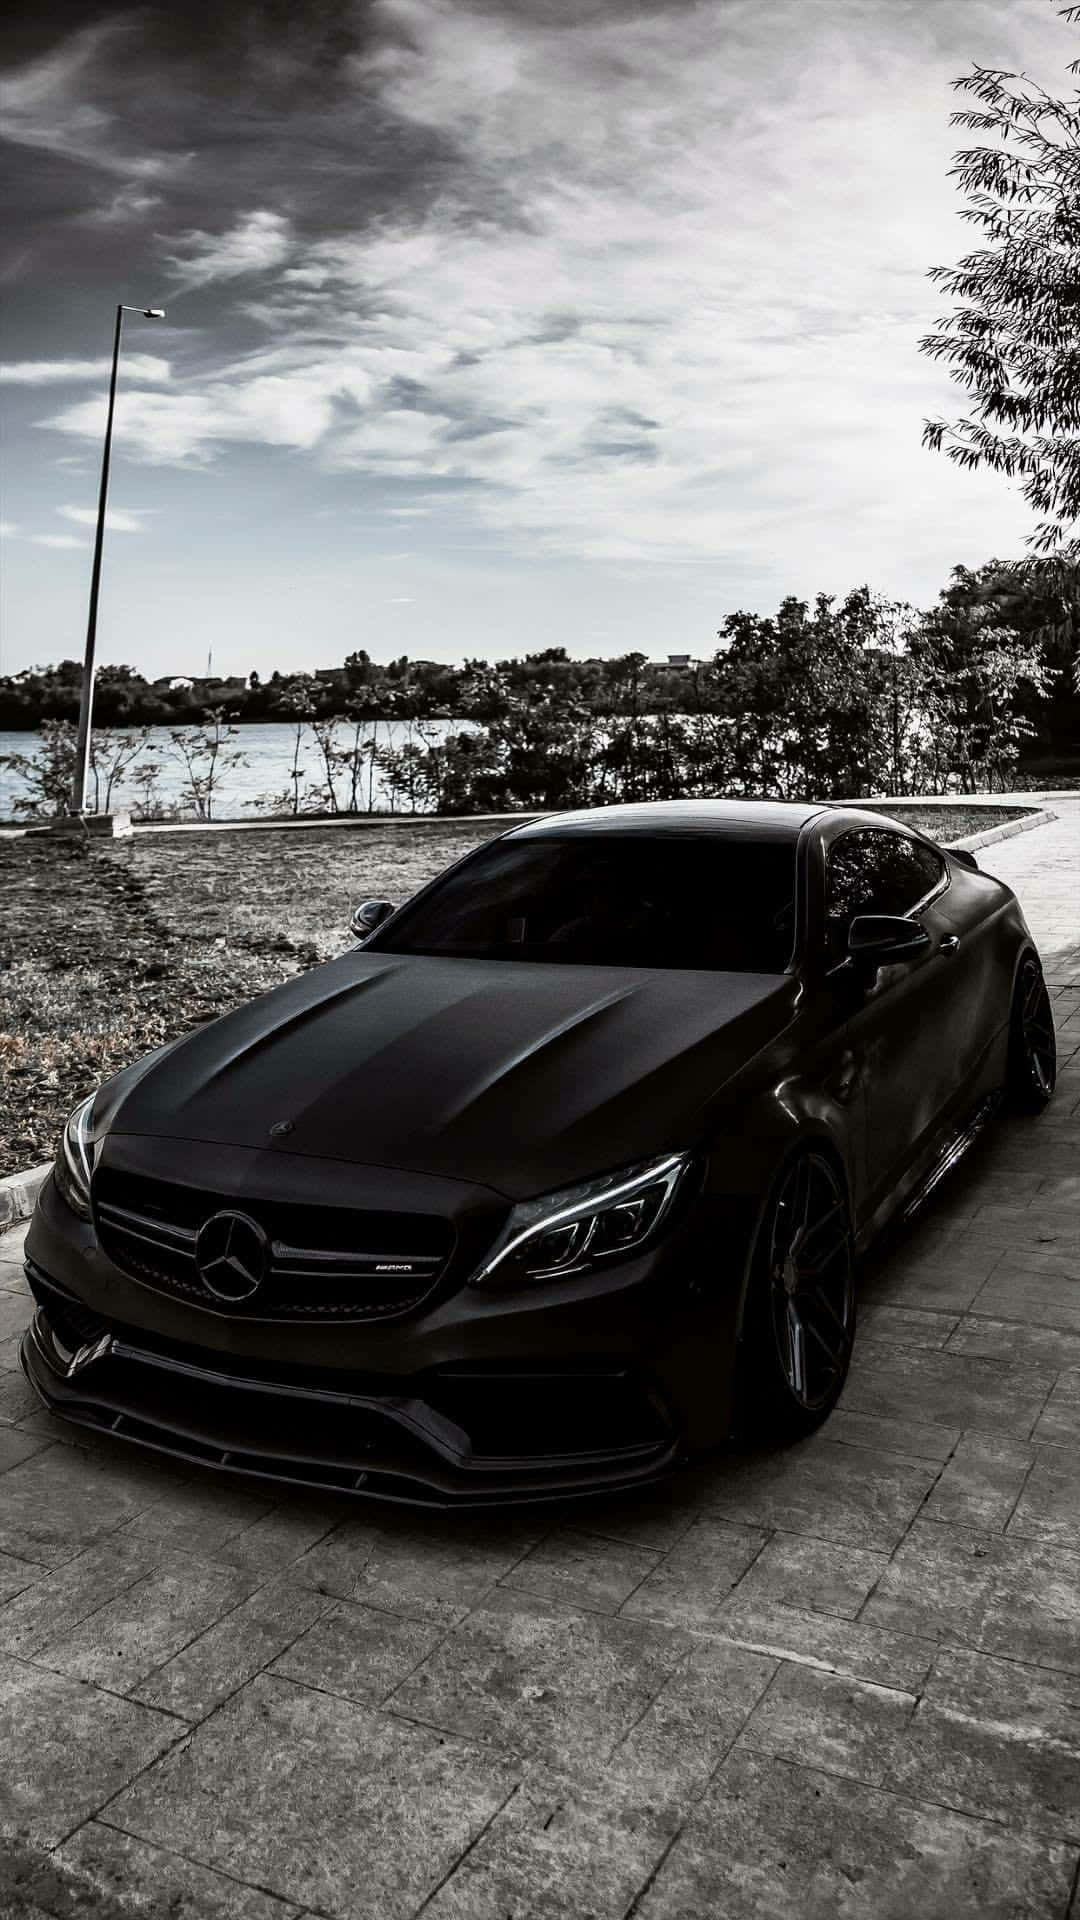 “Never Miss a Call With The New Mercedes Benz Phone” Wallpaper